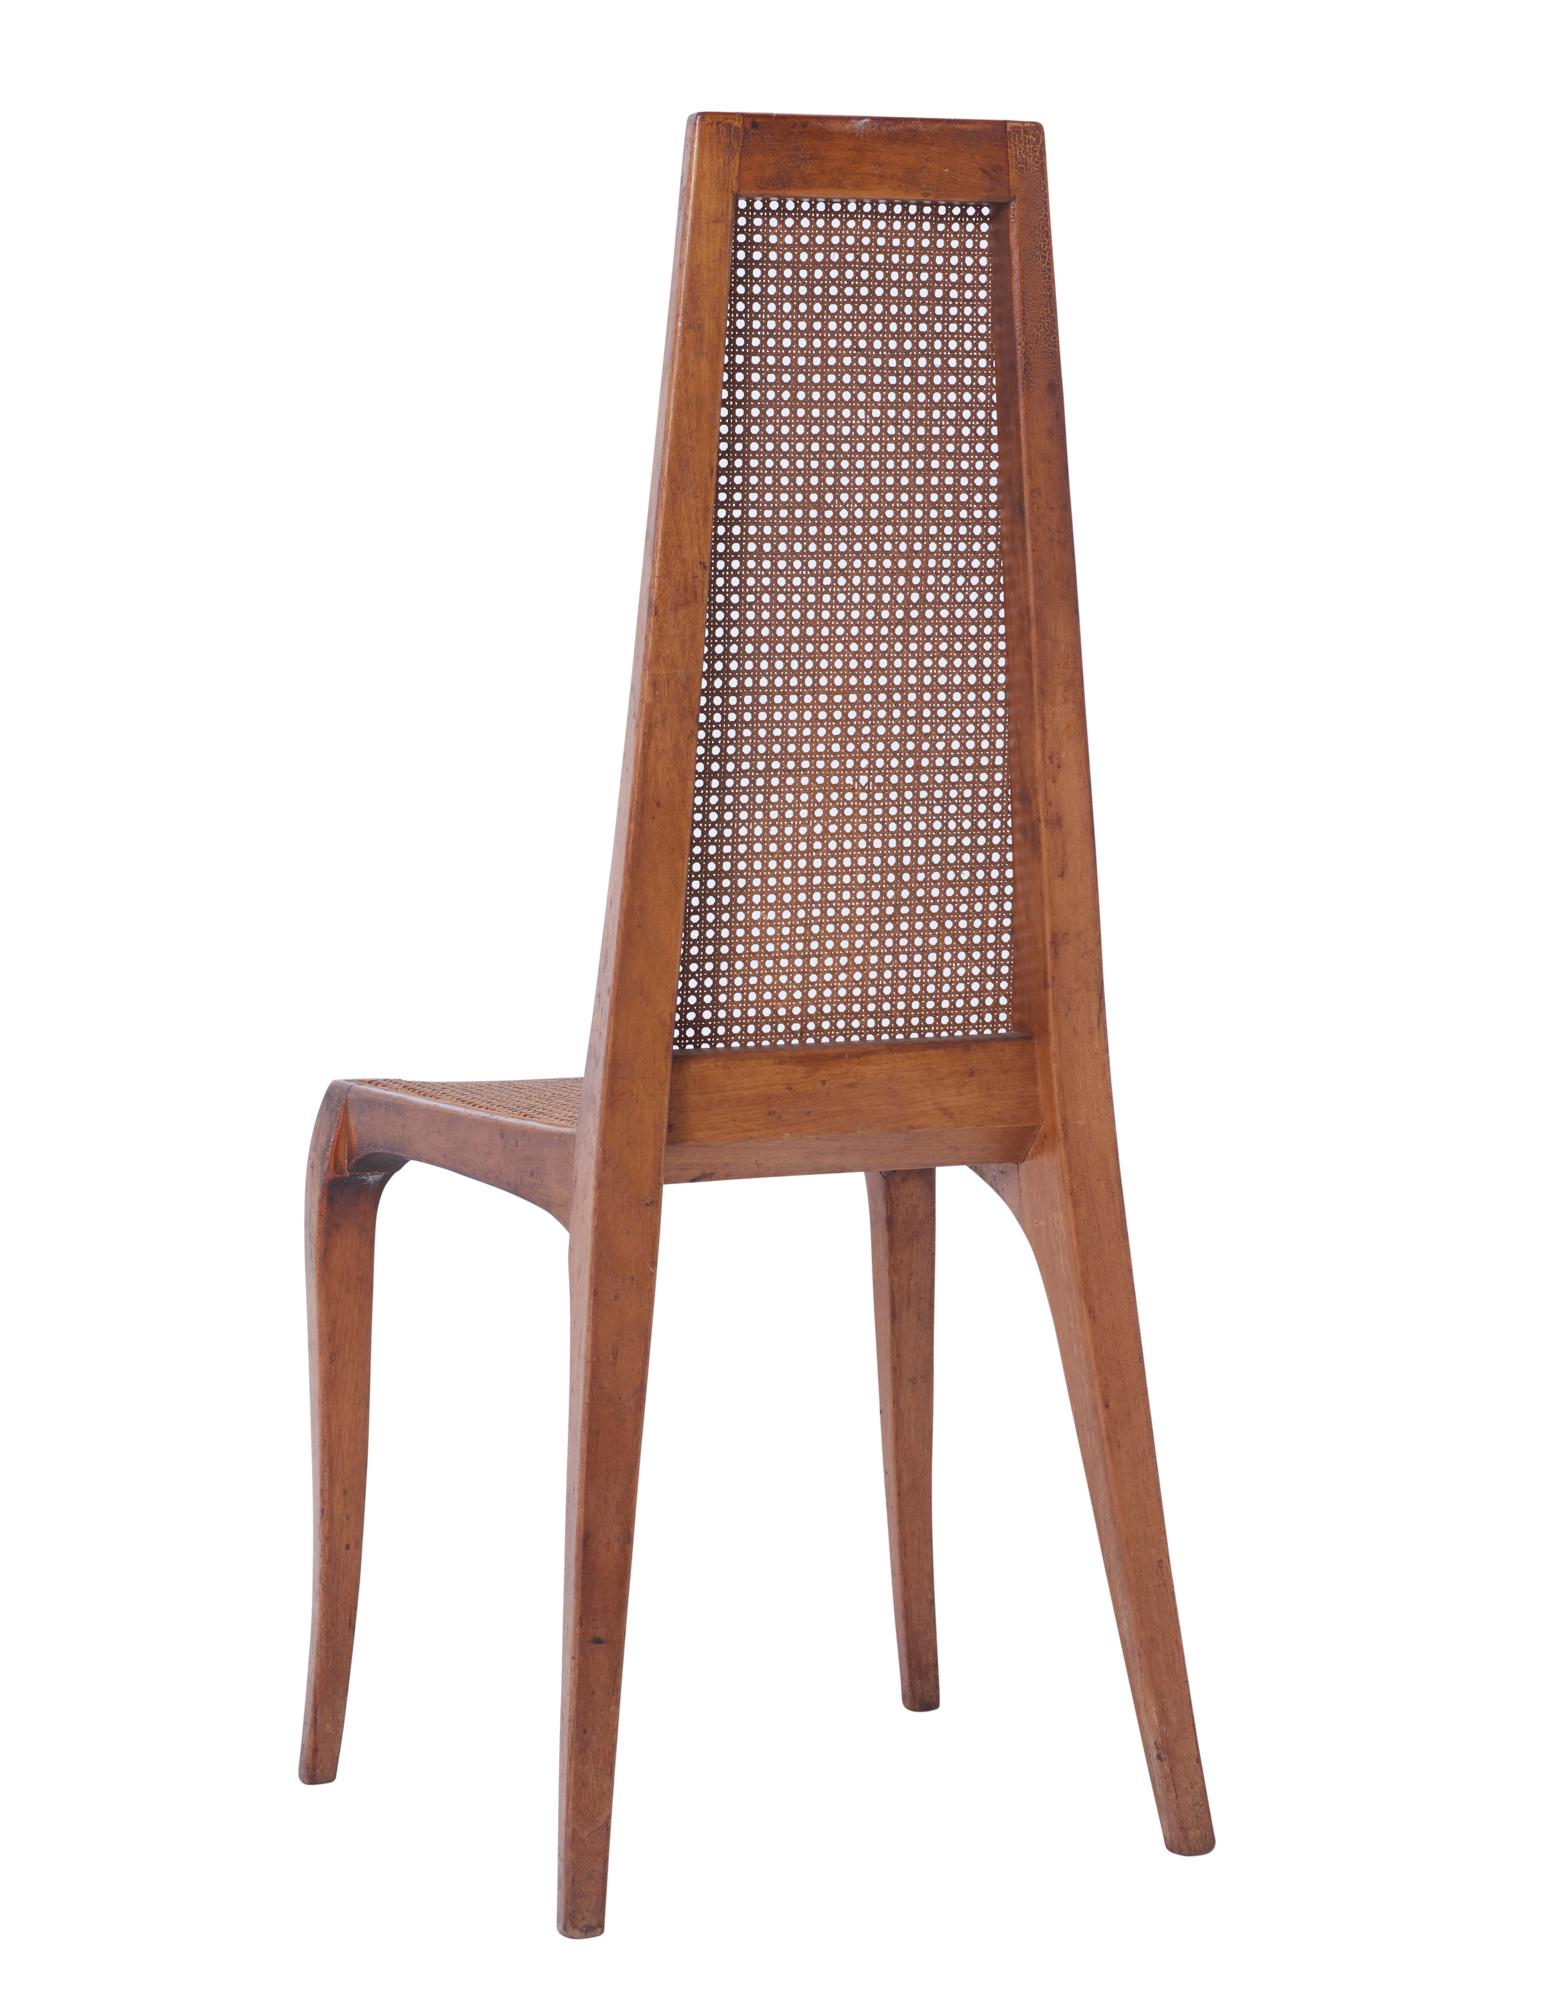 Unknown Pair of Mid-Century Modern Caned Chairs in Walnut, circa 1960